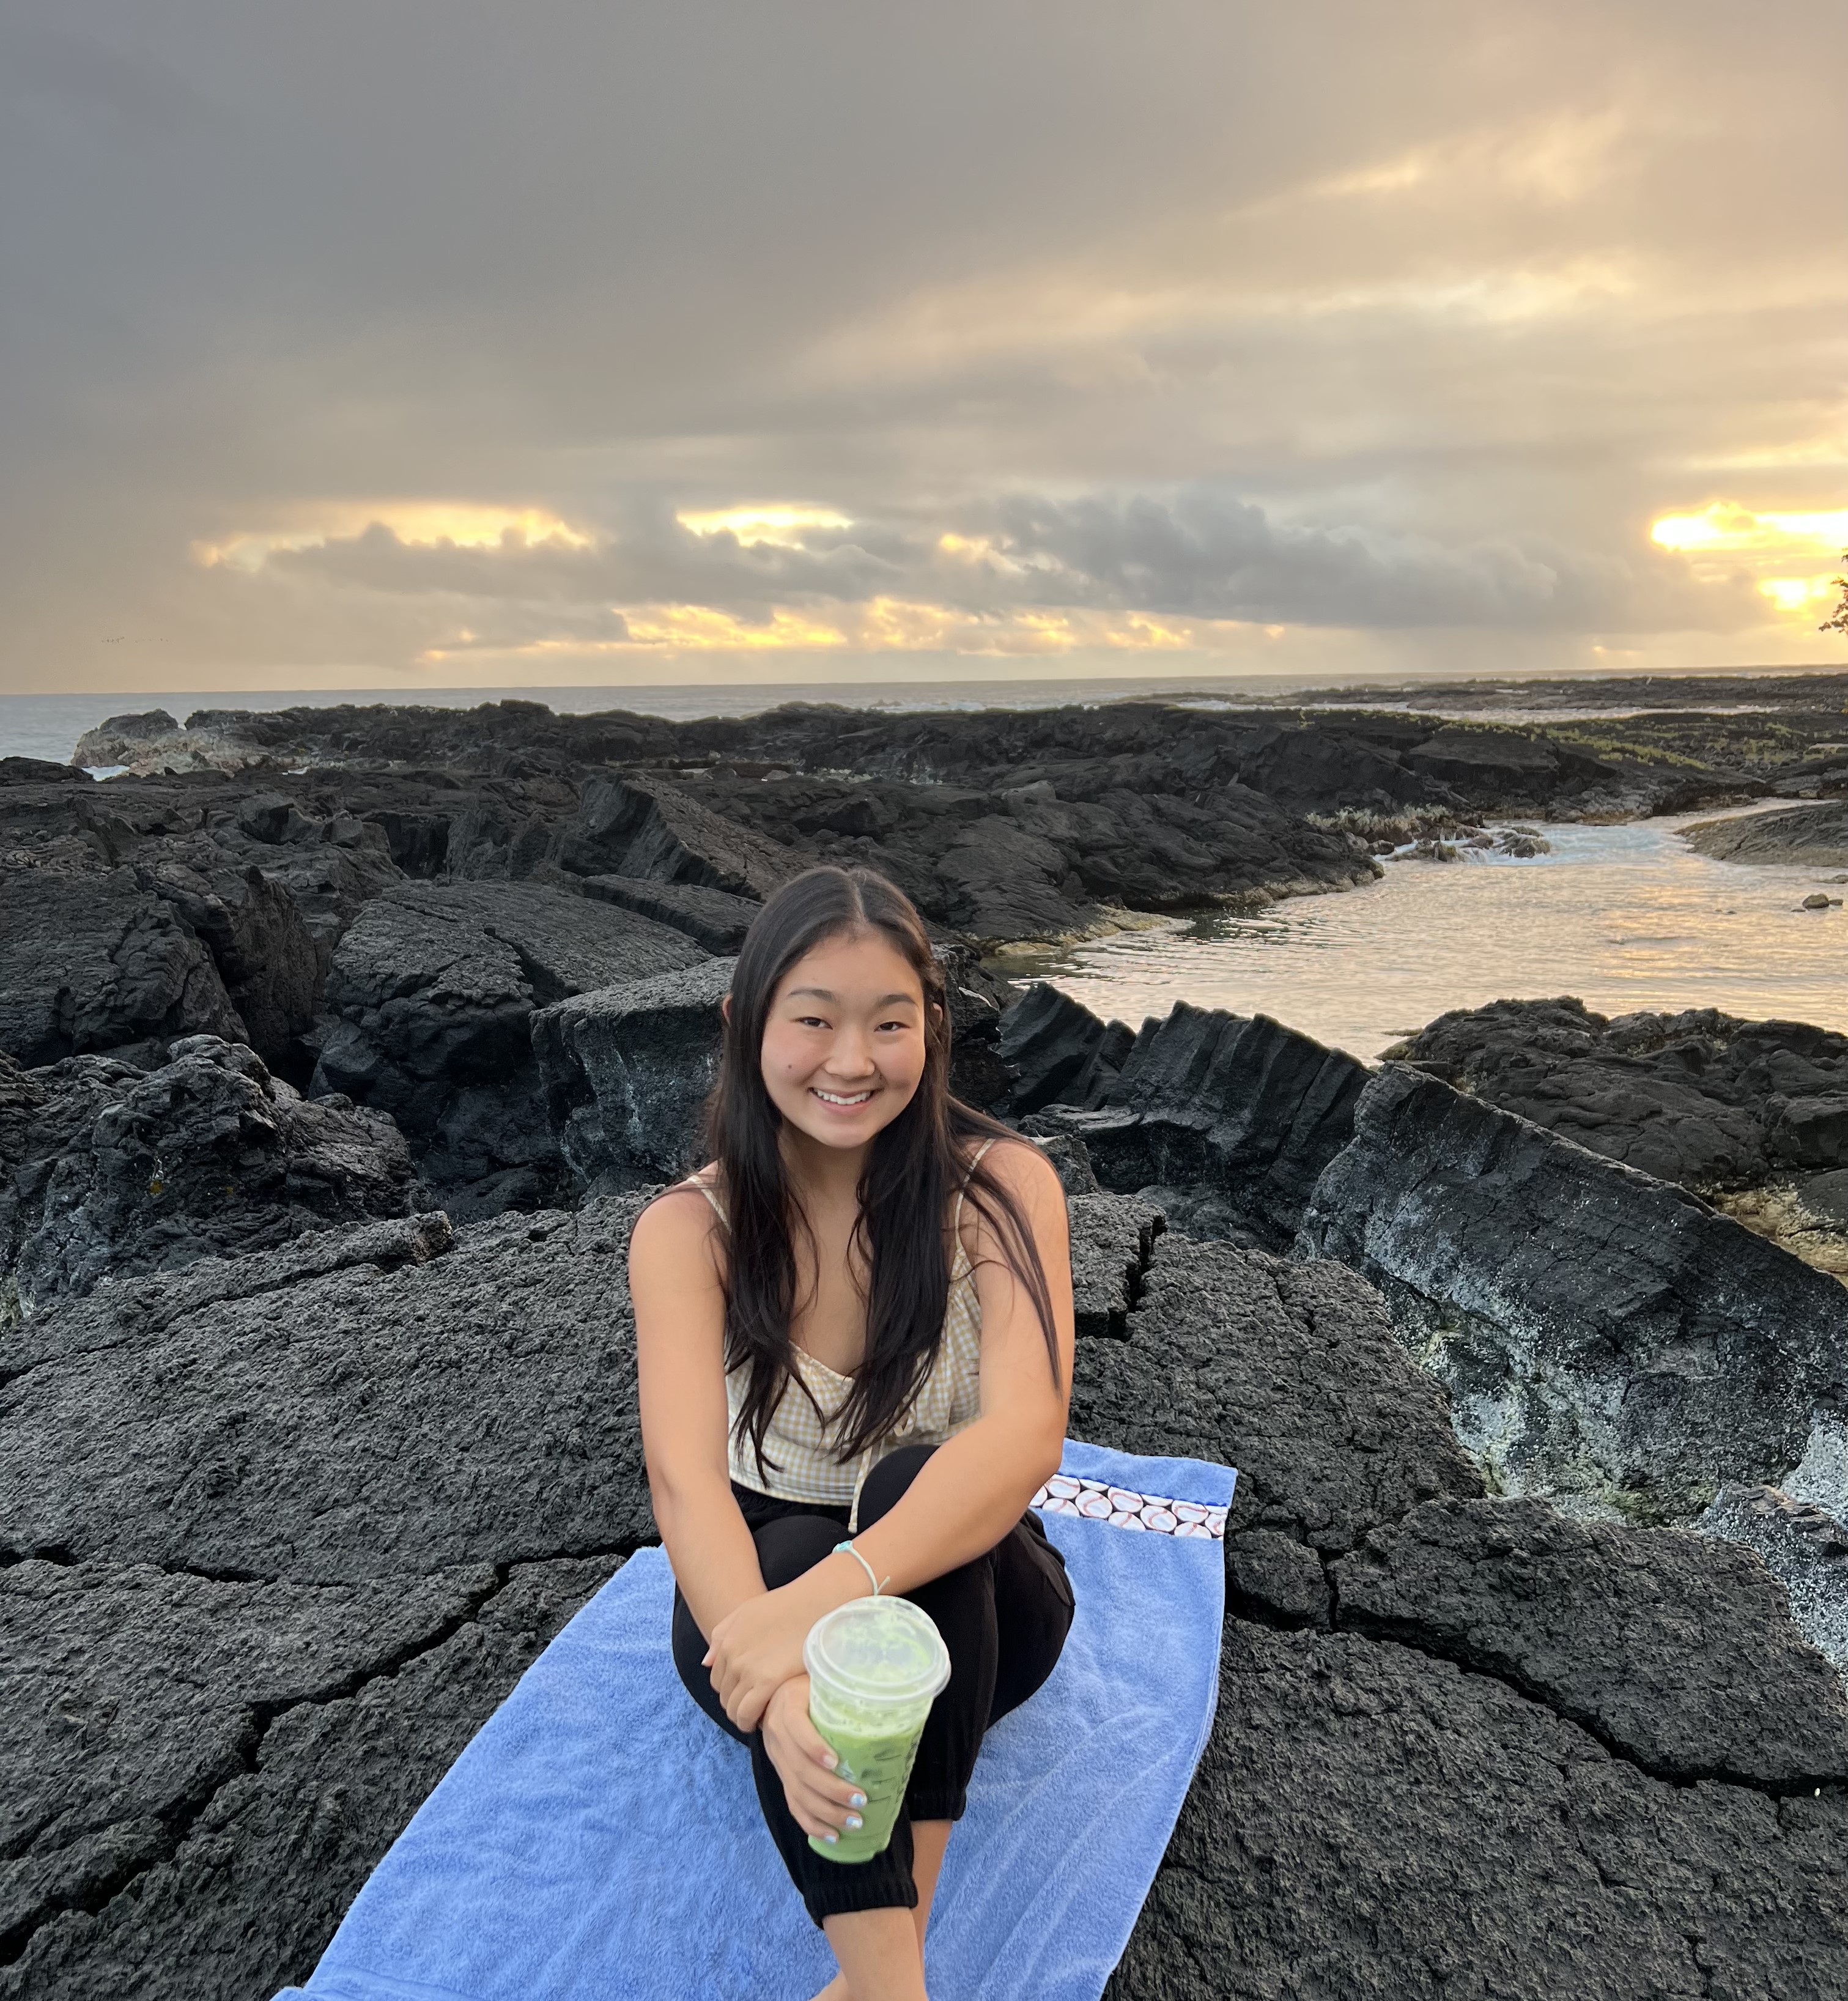 Student photographed sitting on a rock with ocean in the background